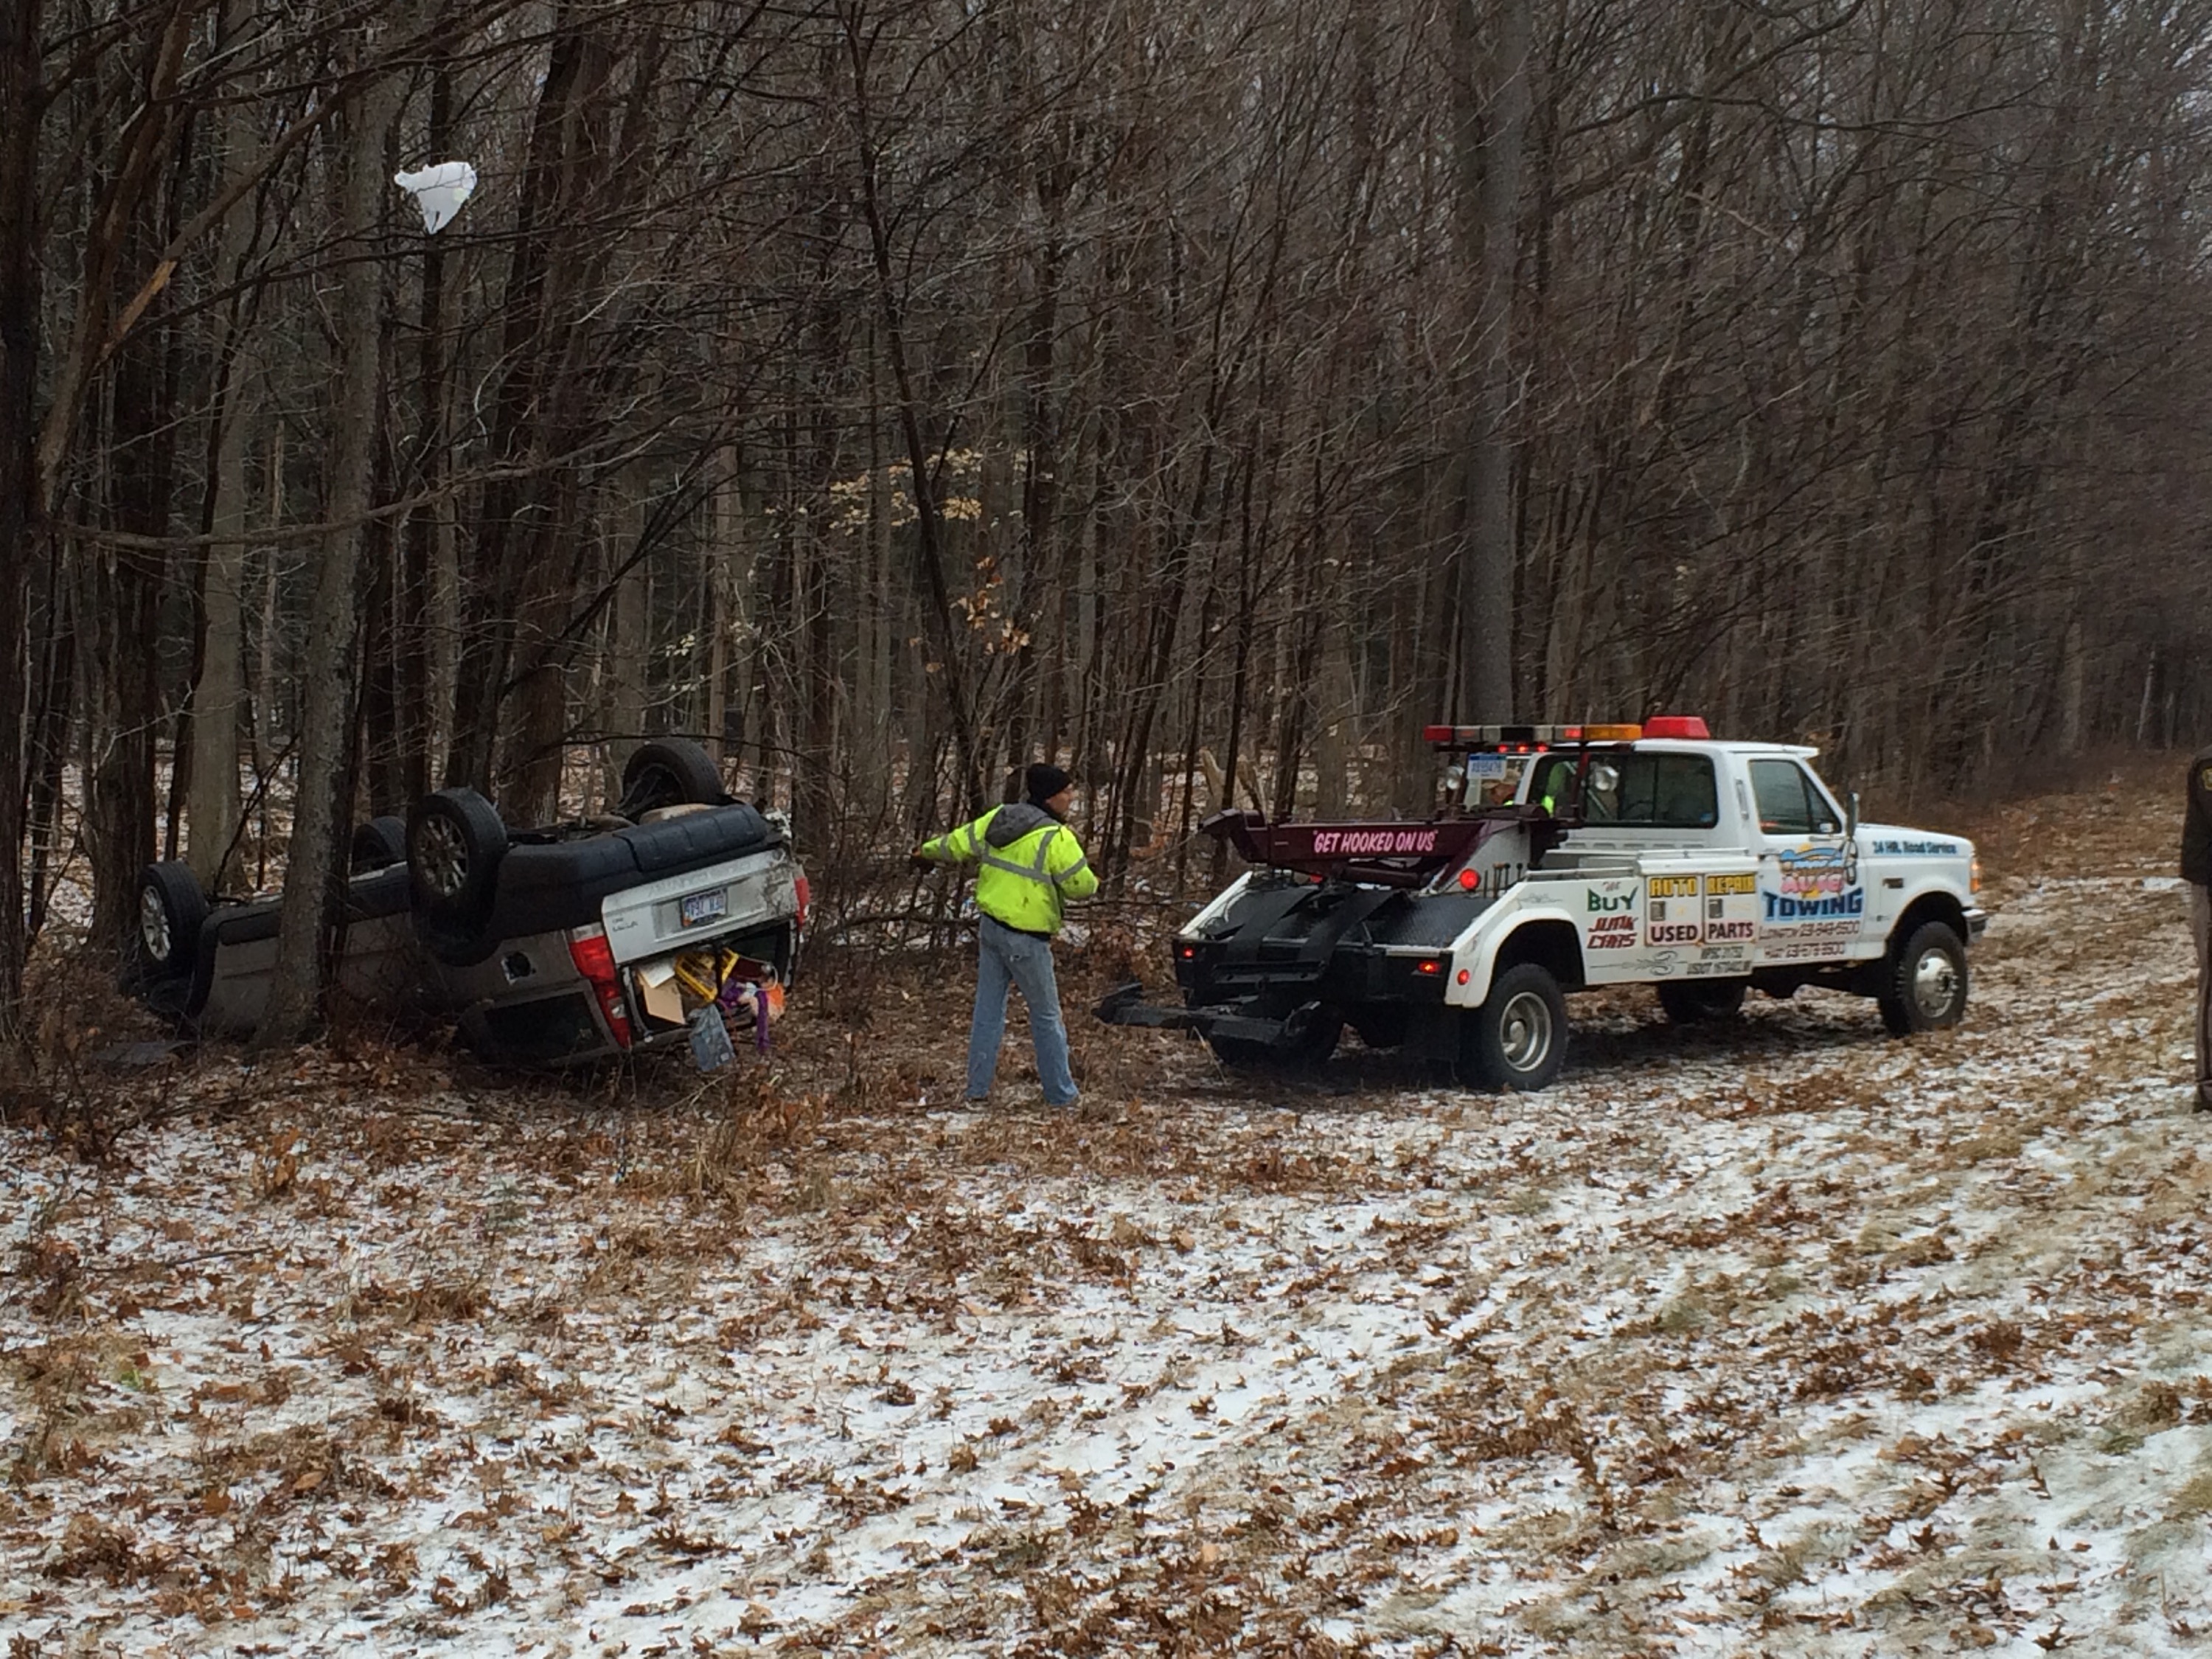 Minor injuries in rollover